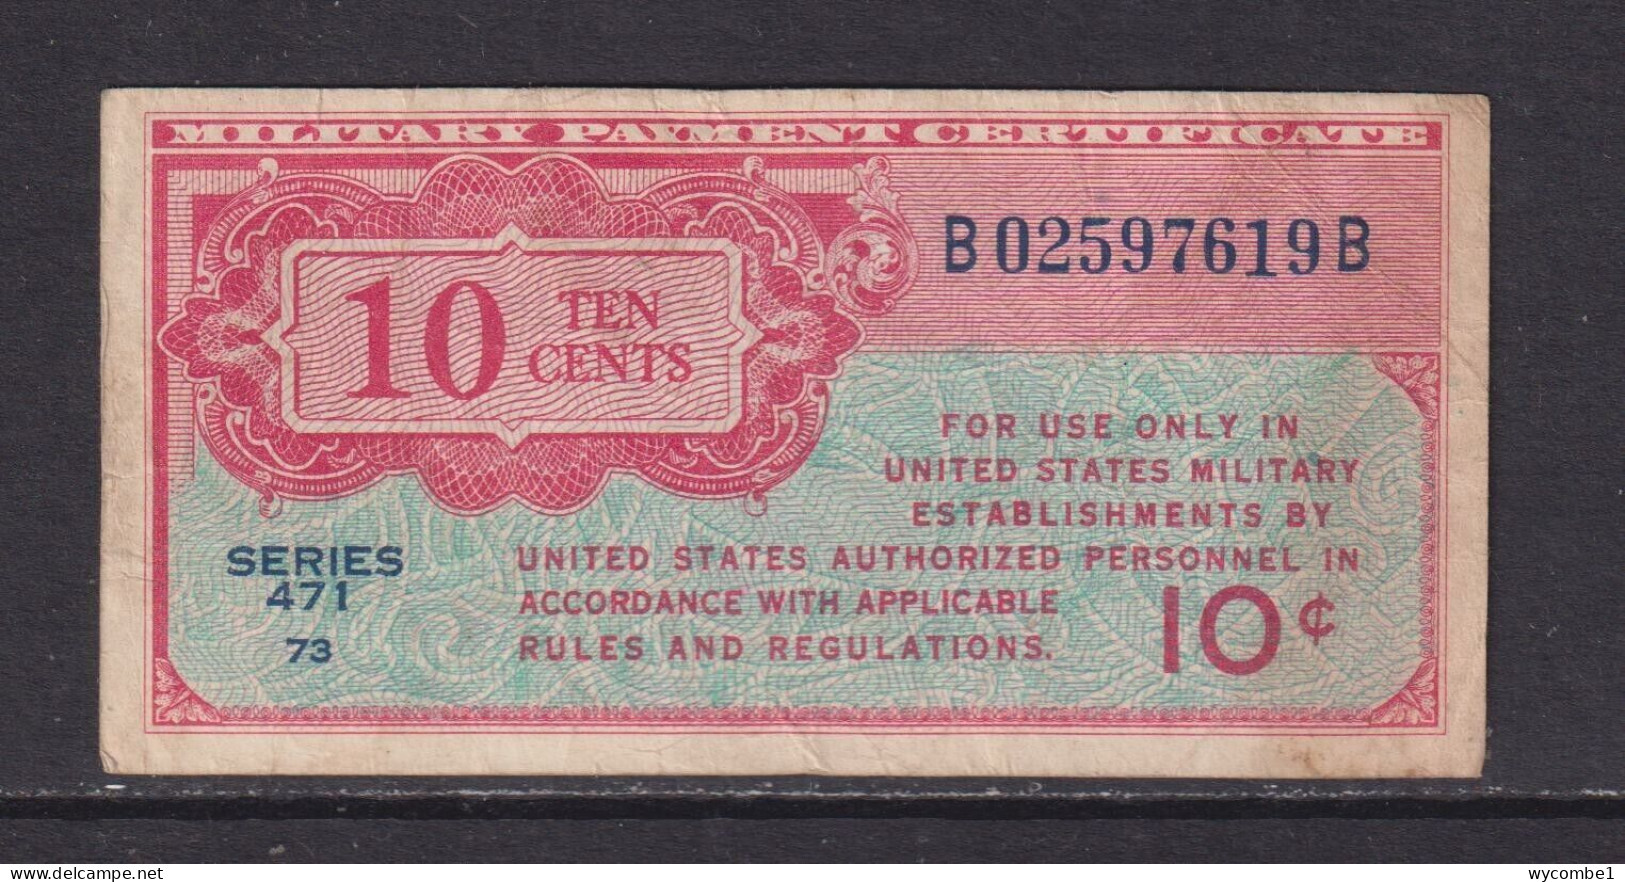 UNITED STATES - 1947 Military Payment Certificate 10 Cents Circulated Banknote - 1947-1948 - Reeksen 471